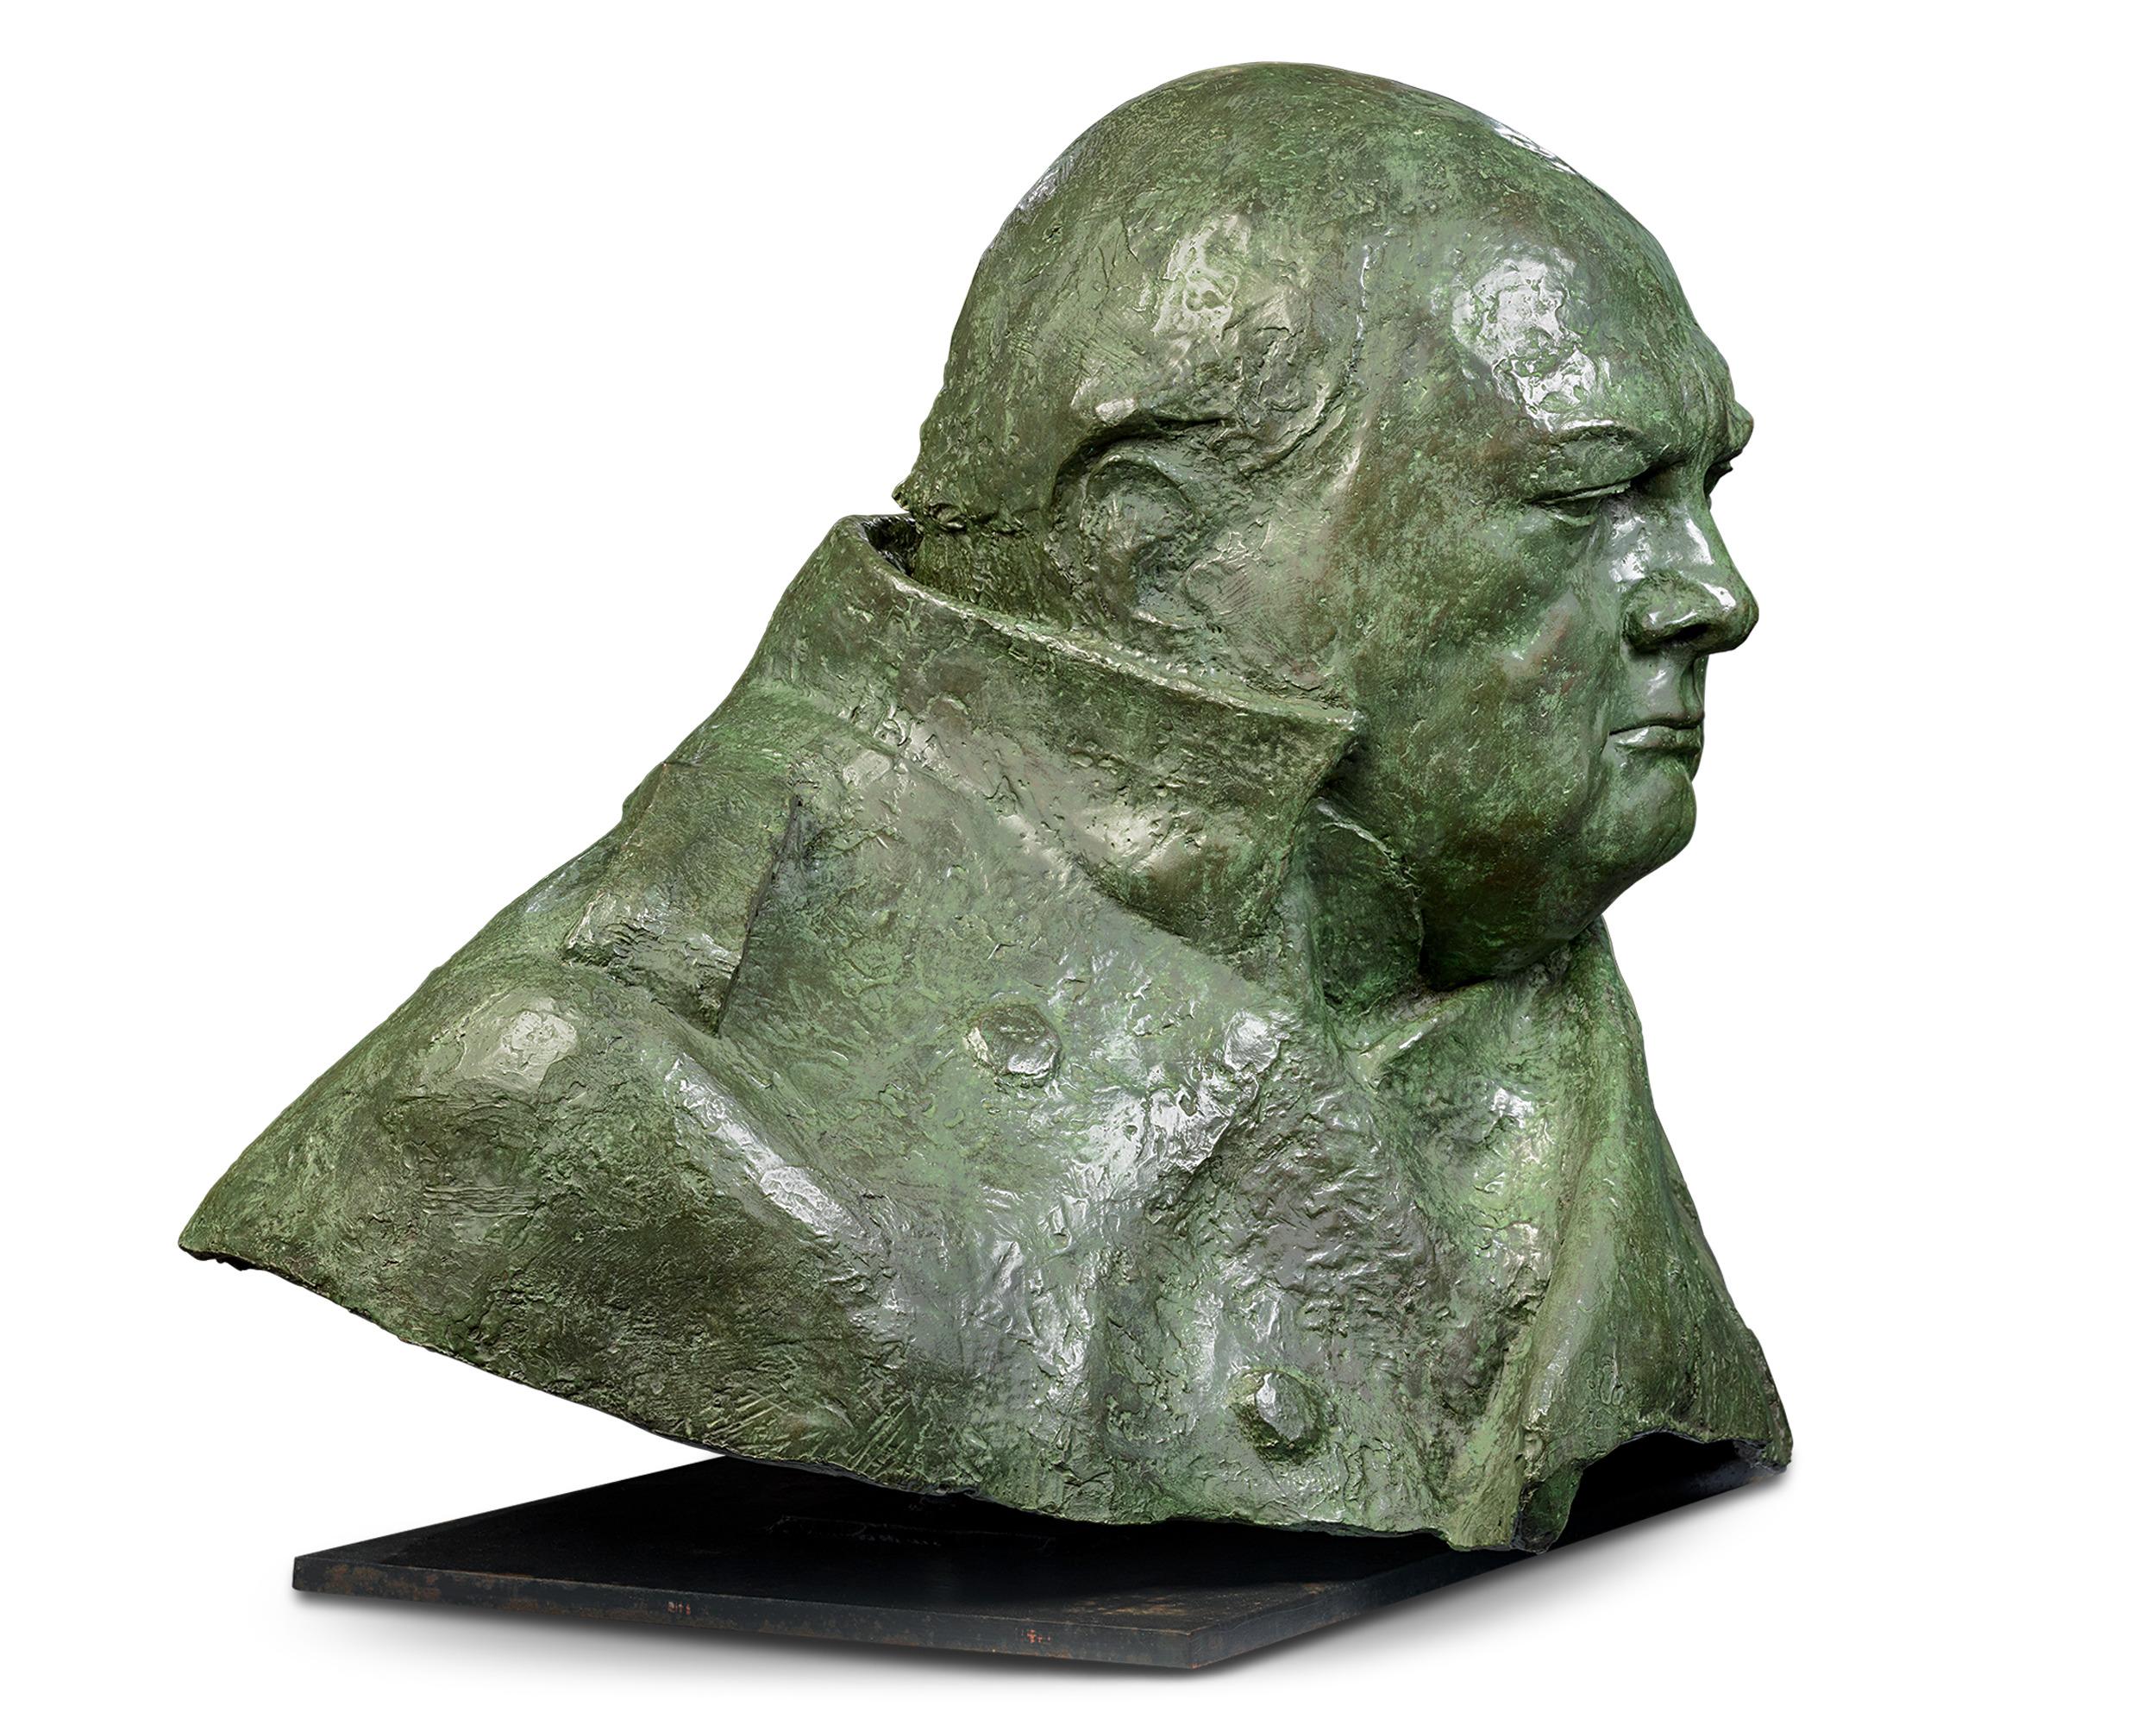 Ivor Roberts-Jones
1916-1996  British

Sir Winston Churchill

Artist Proof
Bronze with a green patina

One of the greatest leaders of the modern world, Winston Churchill is among the most recognizable figures in Western history. This